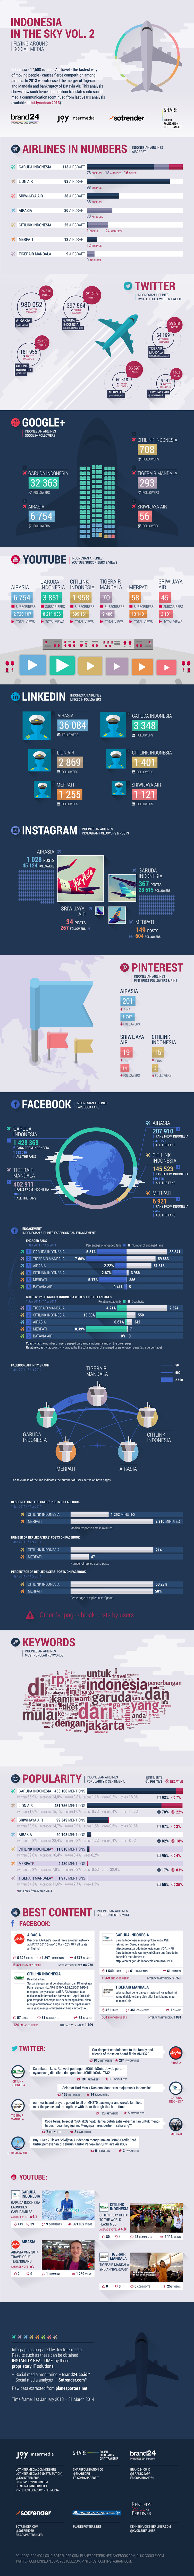 Indonesian airlines in social media - infographic